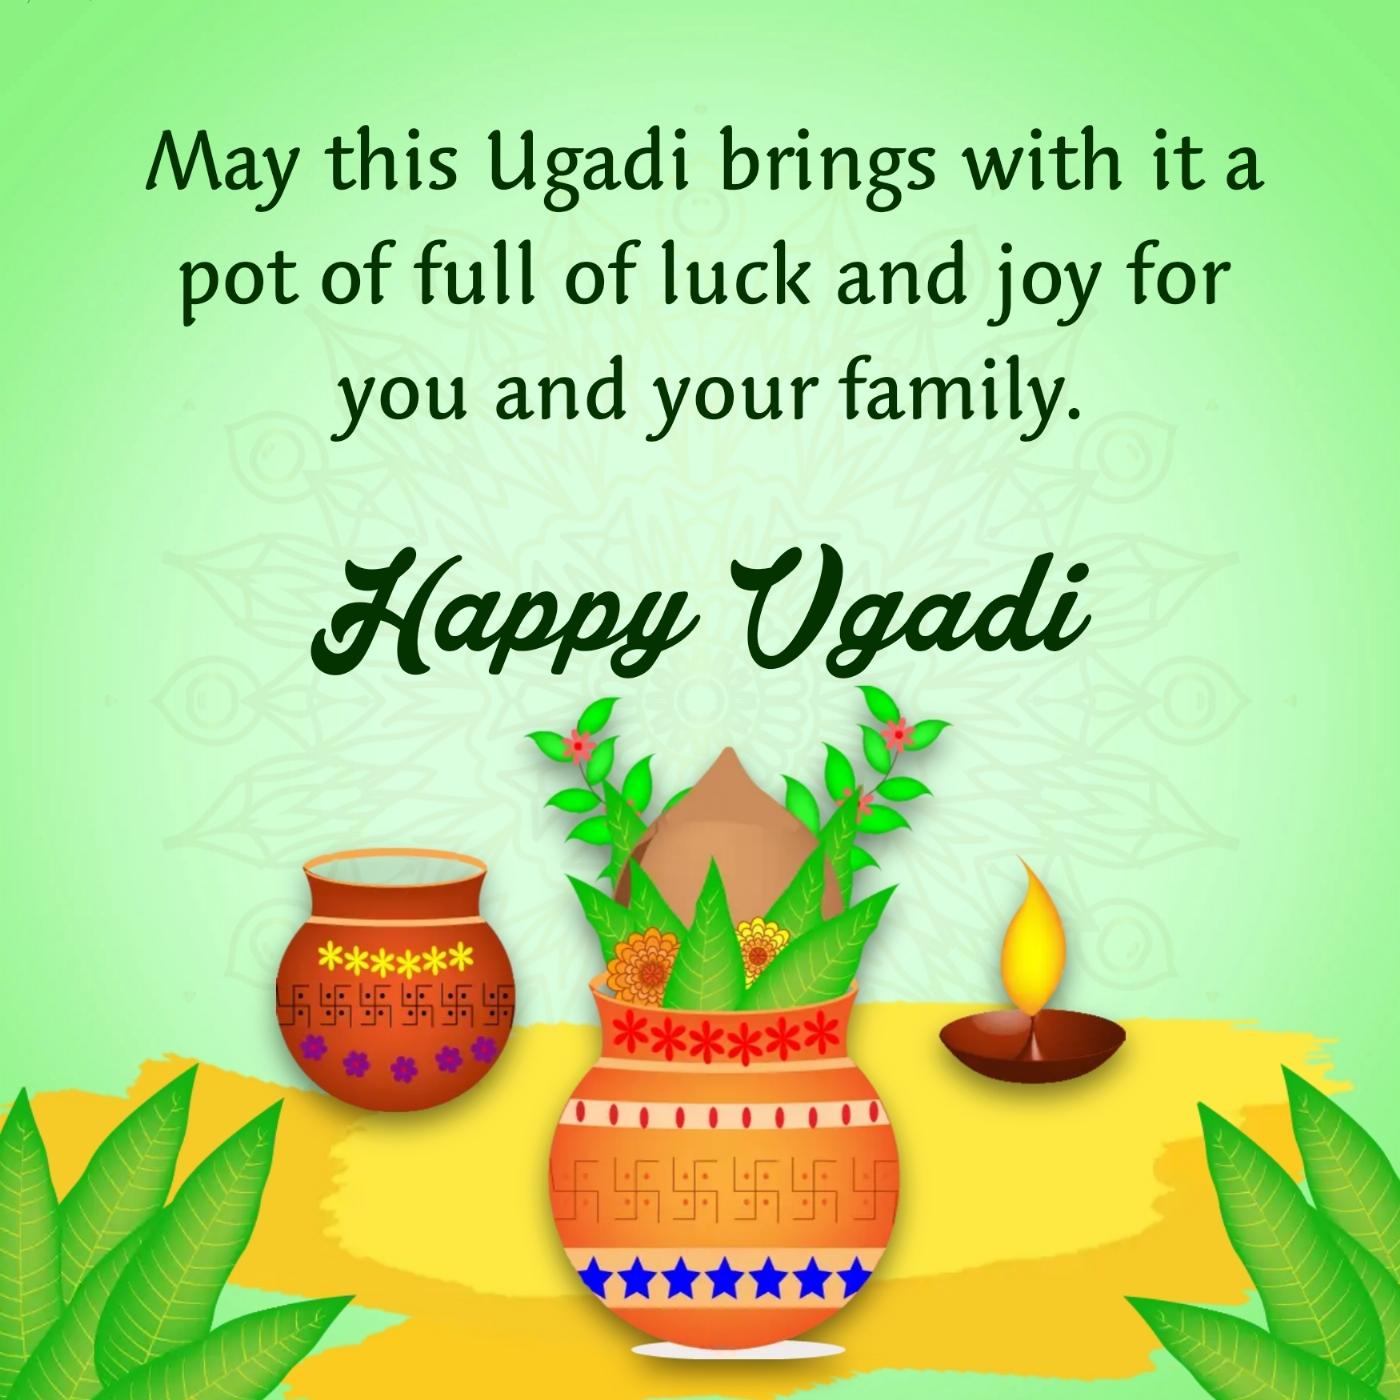 May this Ugadi brings with it a pot of full of luck and joy